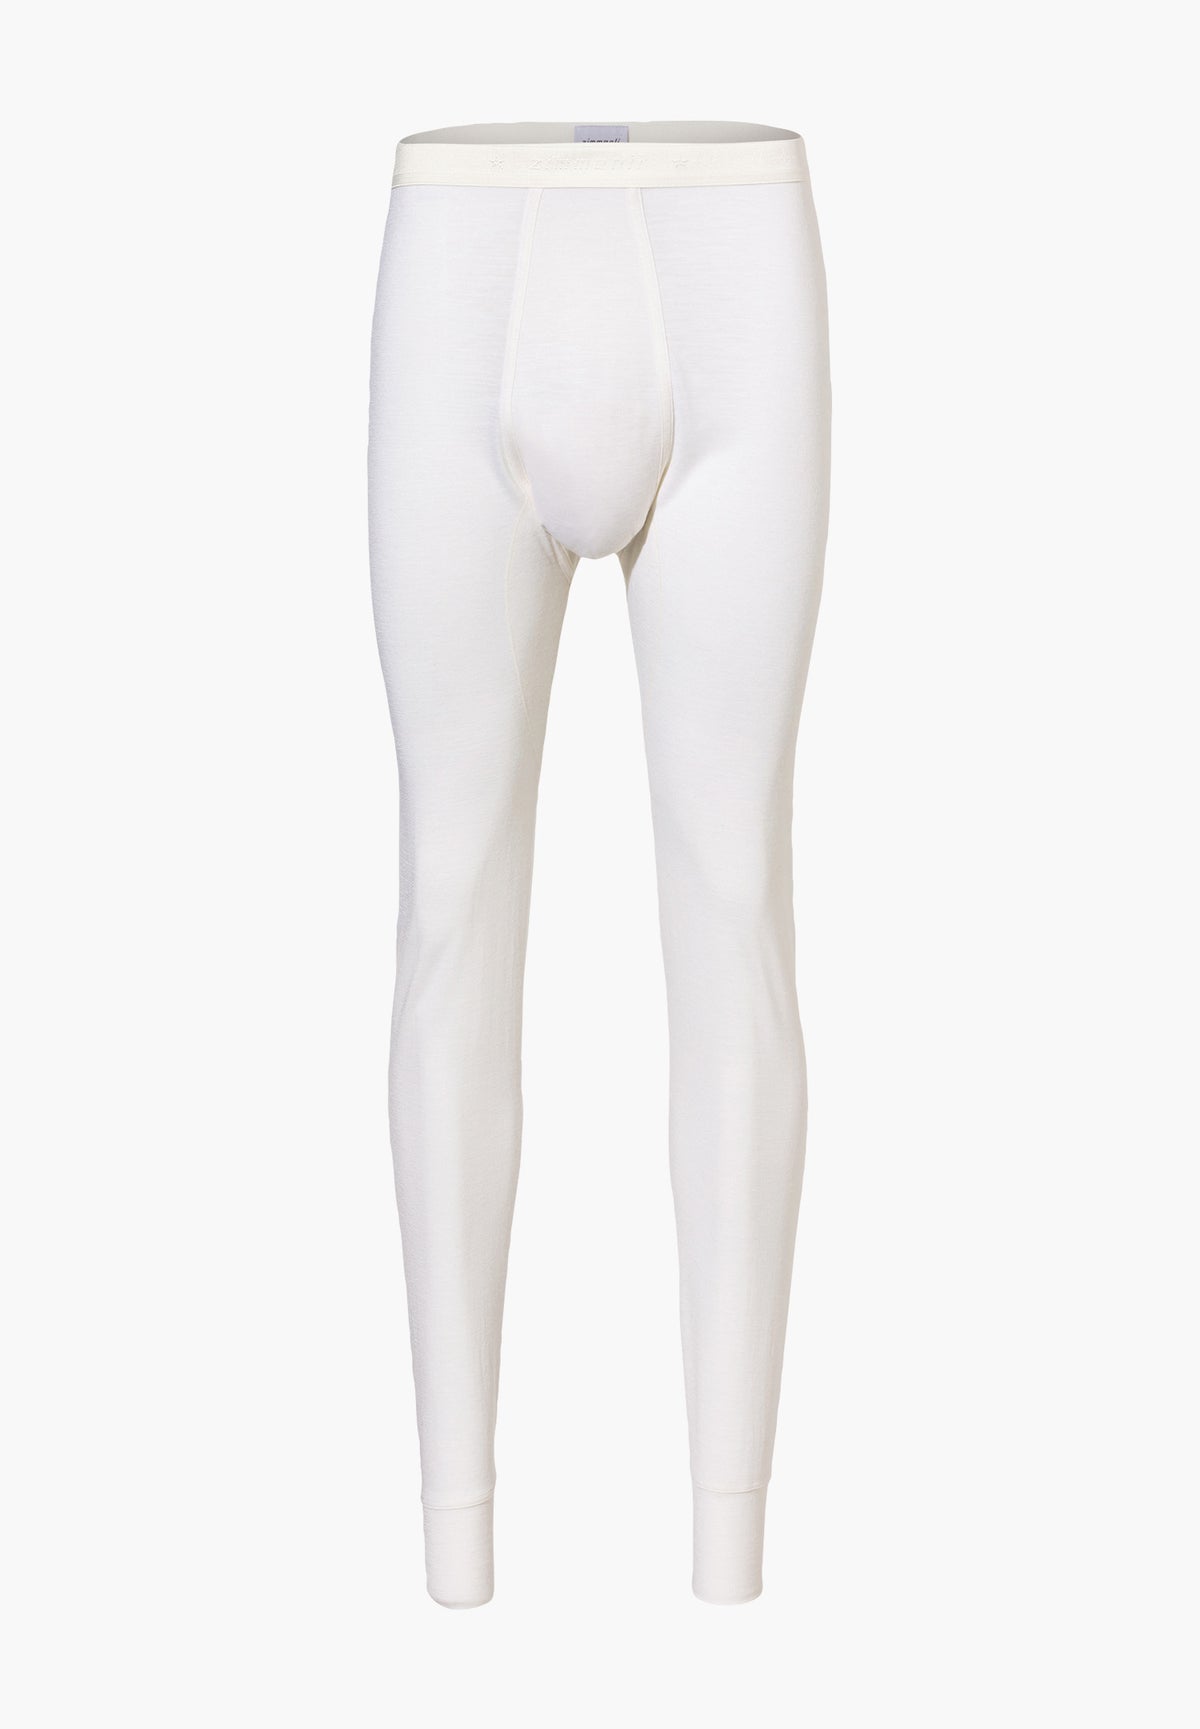 Premium Wool Wool Long Underwear Womens Set For Women And Men Warm Long  Johns And Seamless Thermal Set Winter Clothing For Sexy And Comfortable Wear  L231005 From Bingcoholnciaga, $11.72